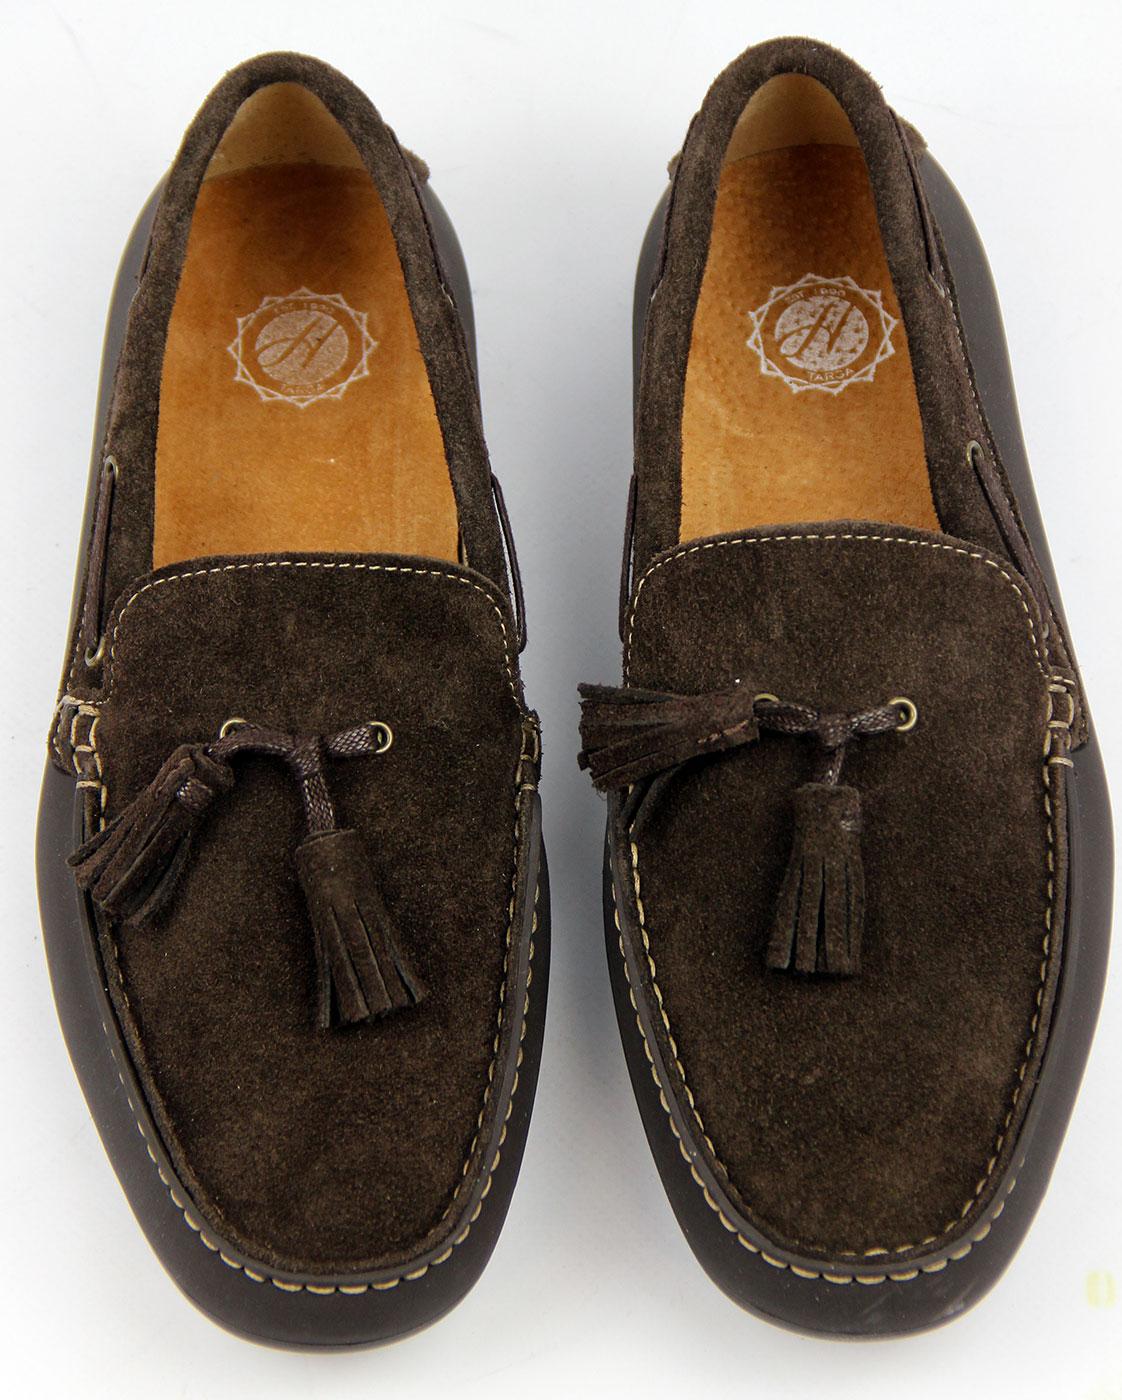 H by HUDSON Retro 60s Mod Suede Tassel Driving Shoes Brown